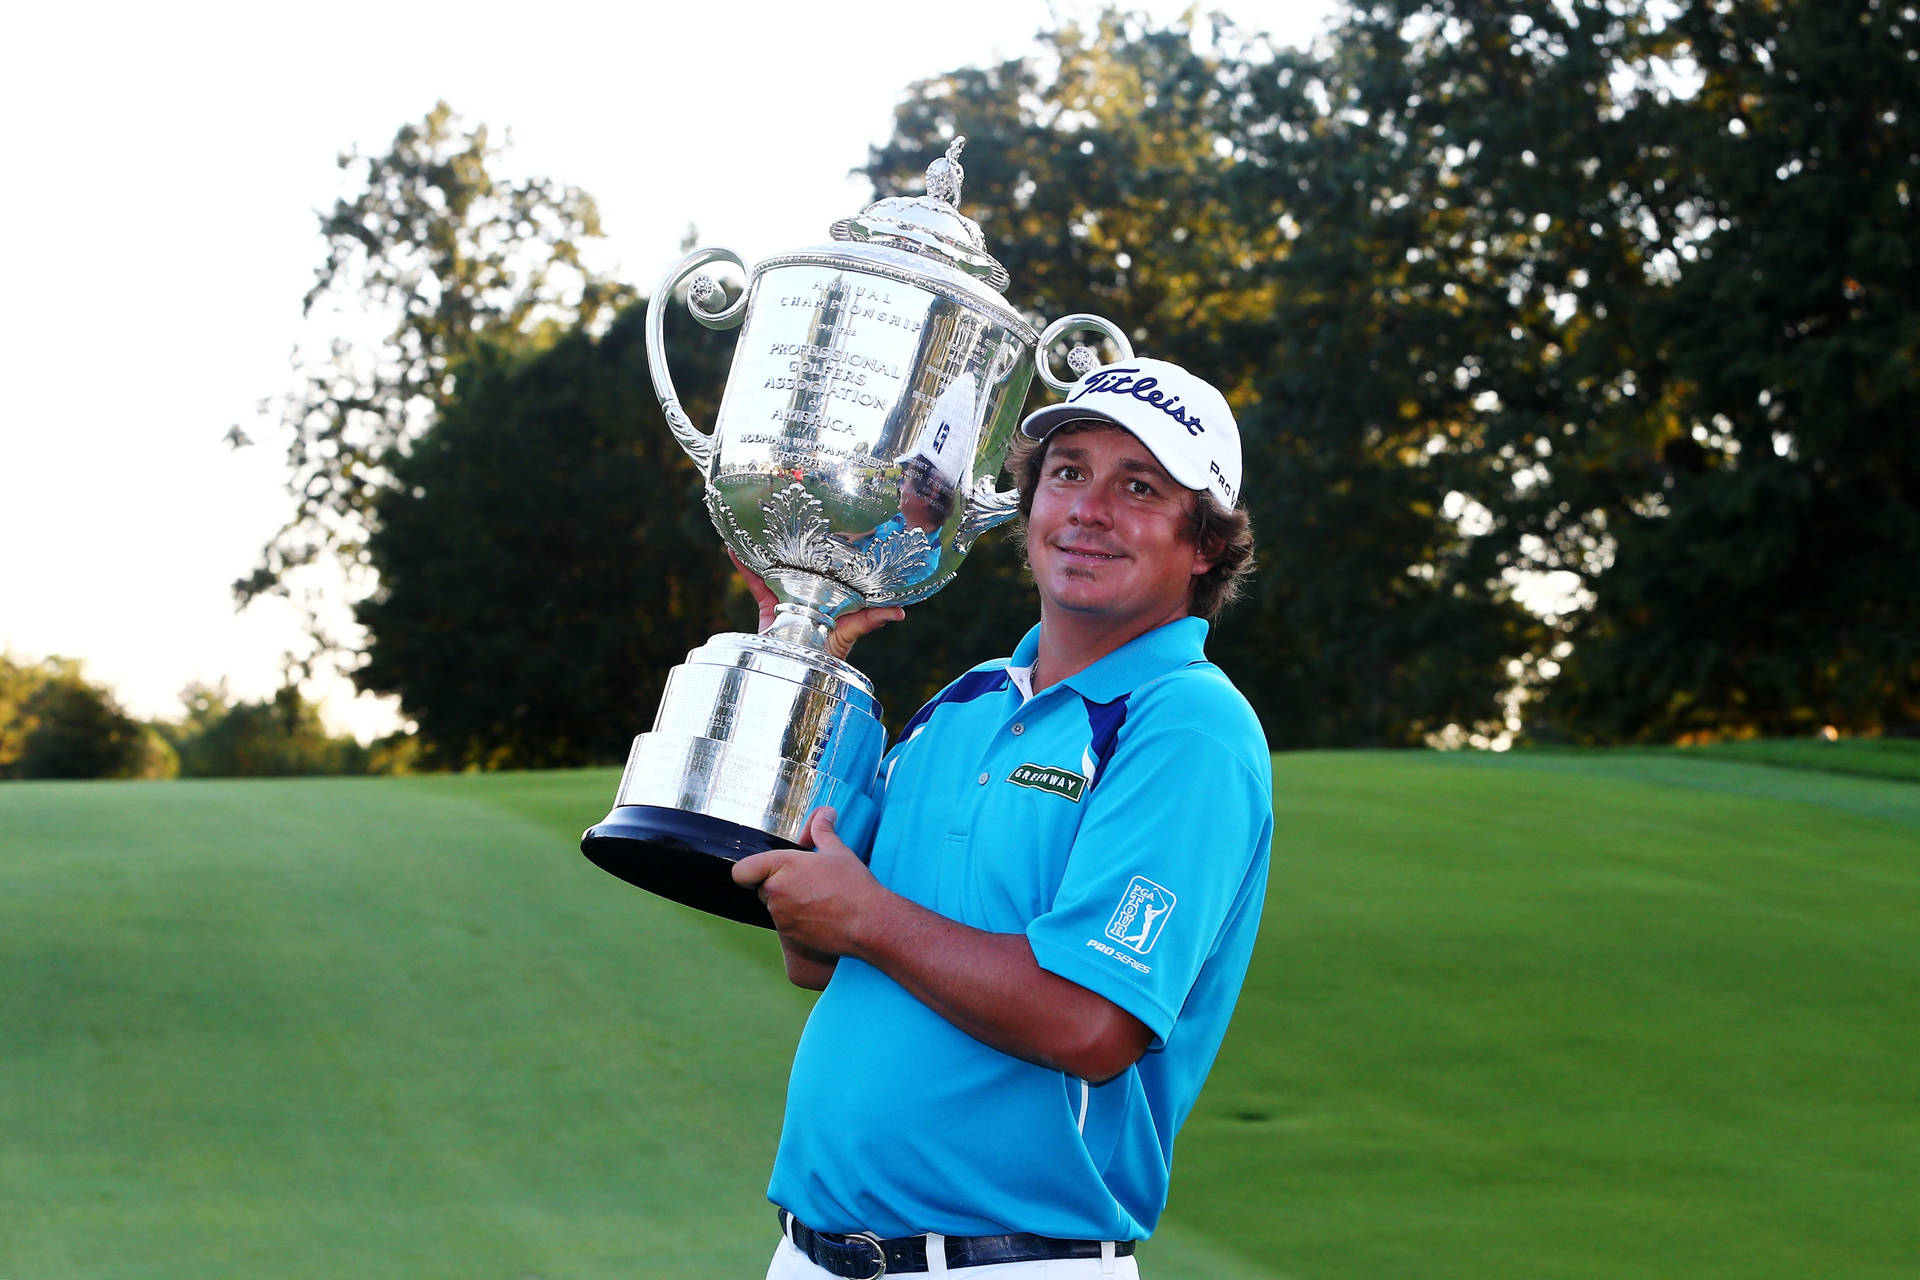 Jason Dufner Carrying His Silver Trophy Wallpaper